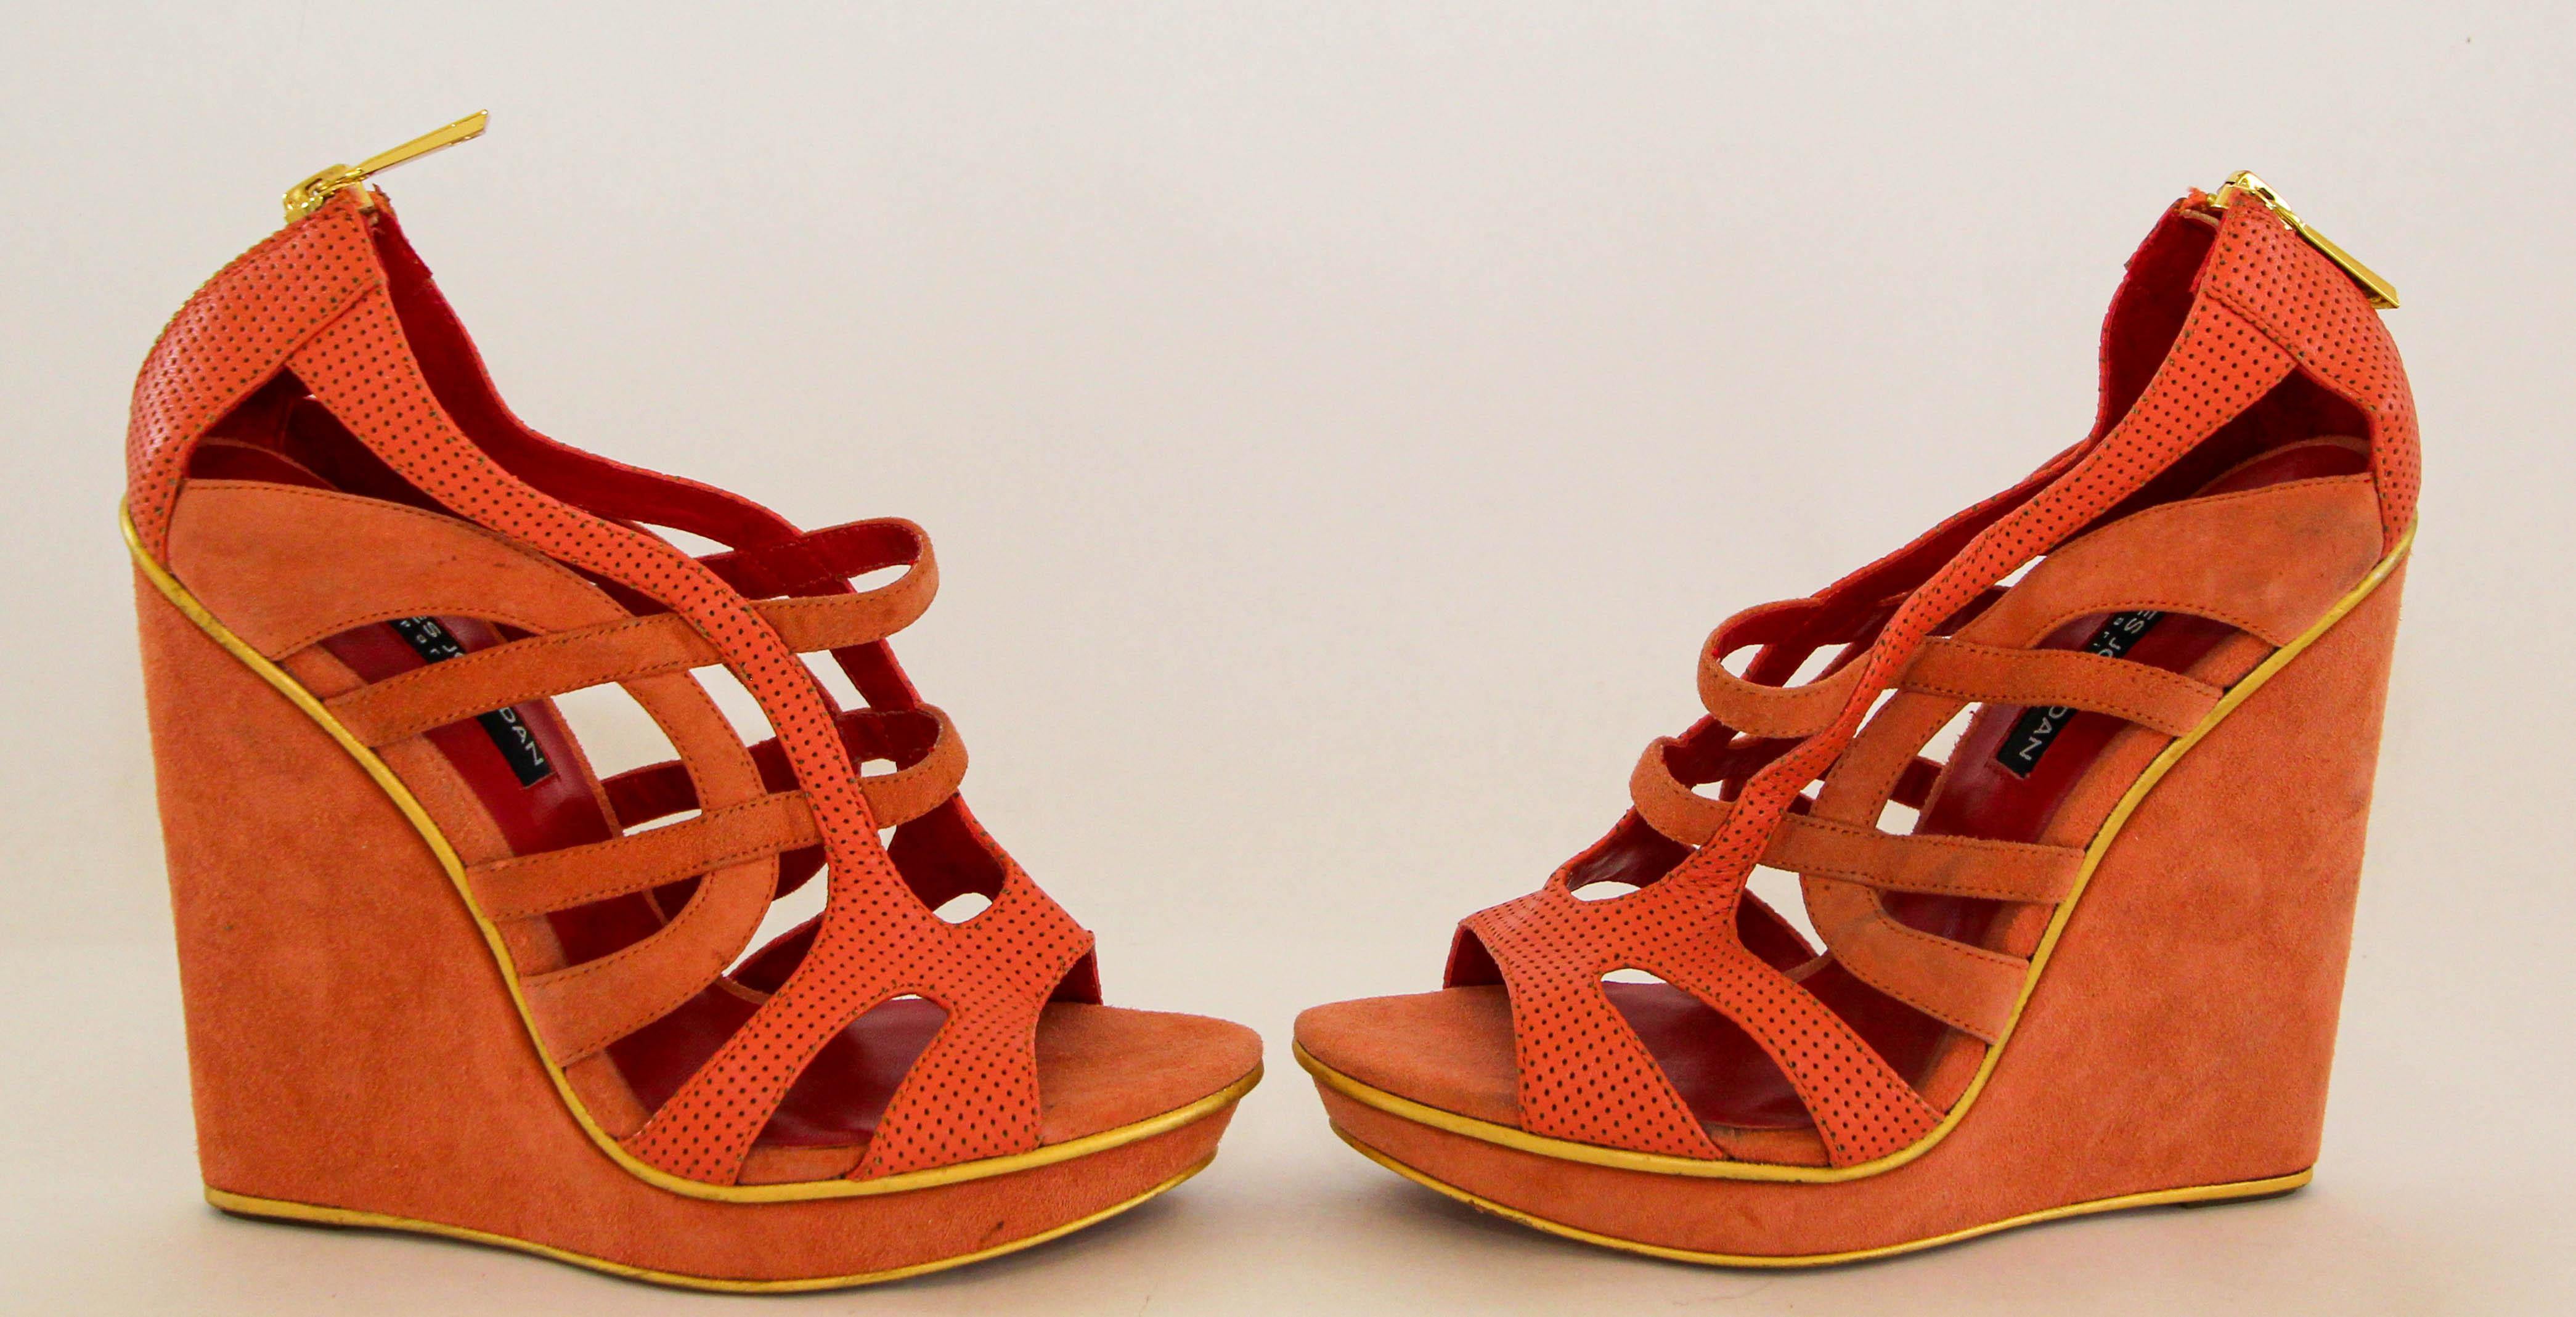 Charles Jourdan Paris Orange Wedge Sandals Size US 6 EU 36 In Good Condition For Sale In North Hollywood, CA